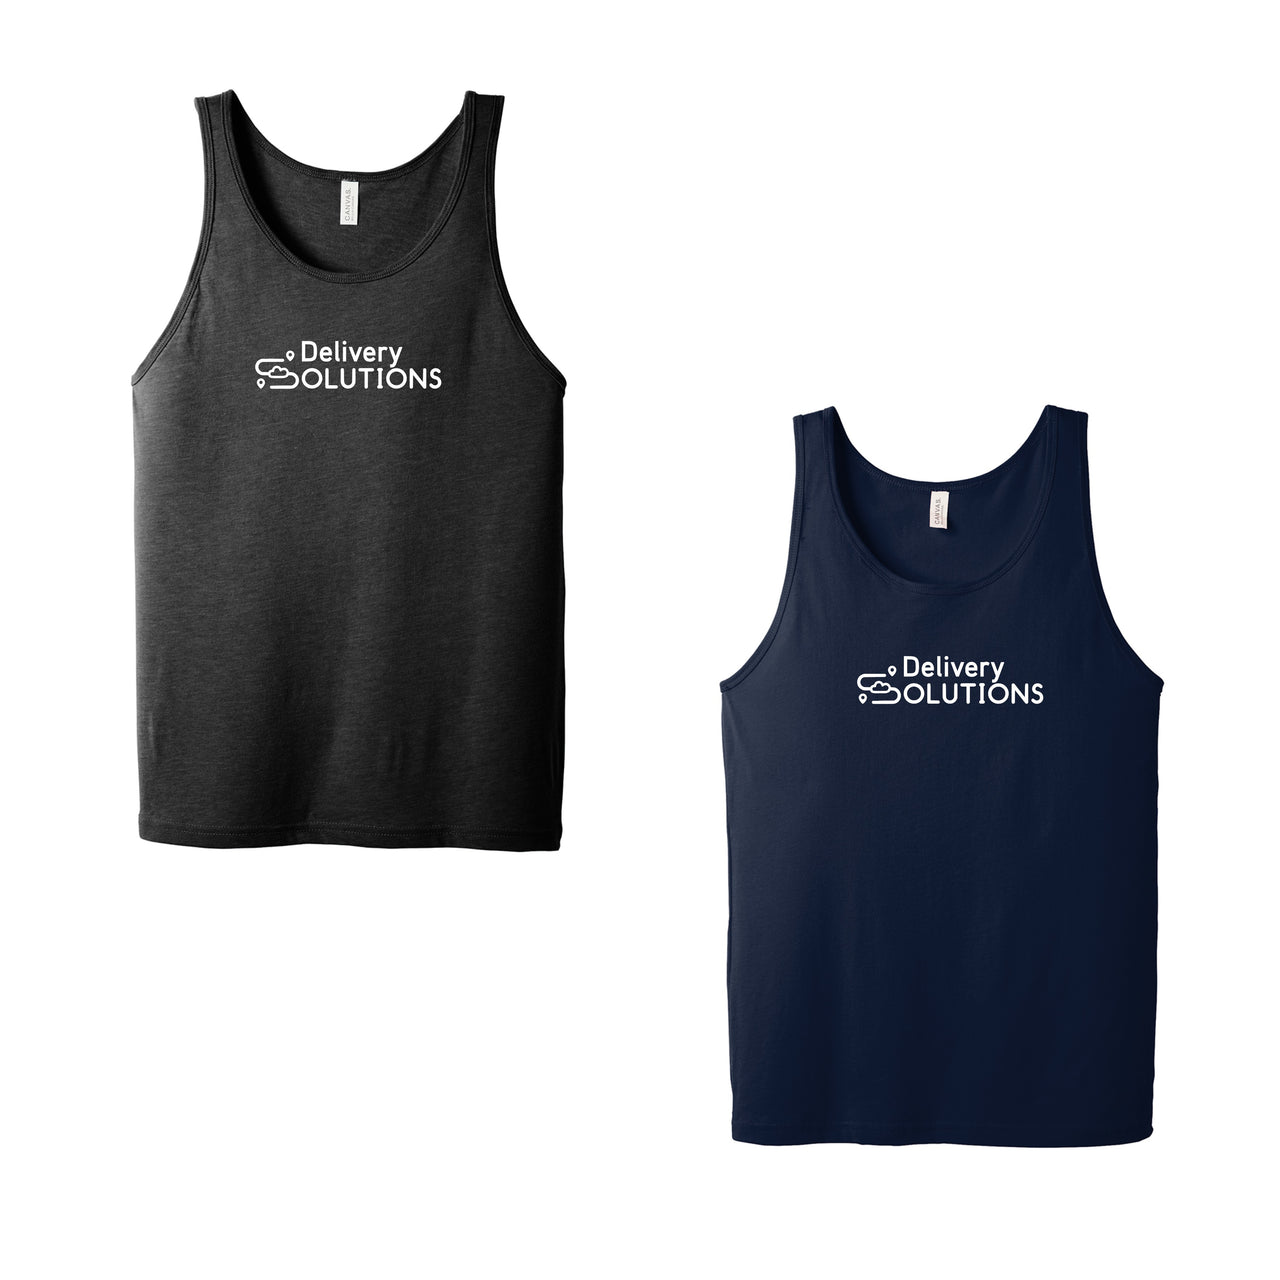 Adult - Unisex Jersey Tank - Bella (Delivery Solutions)